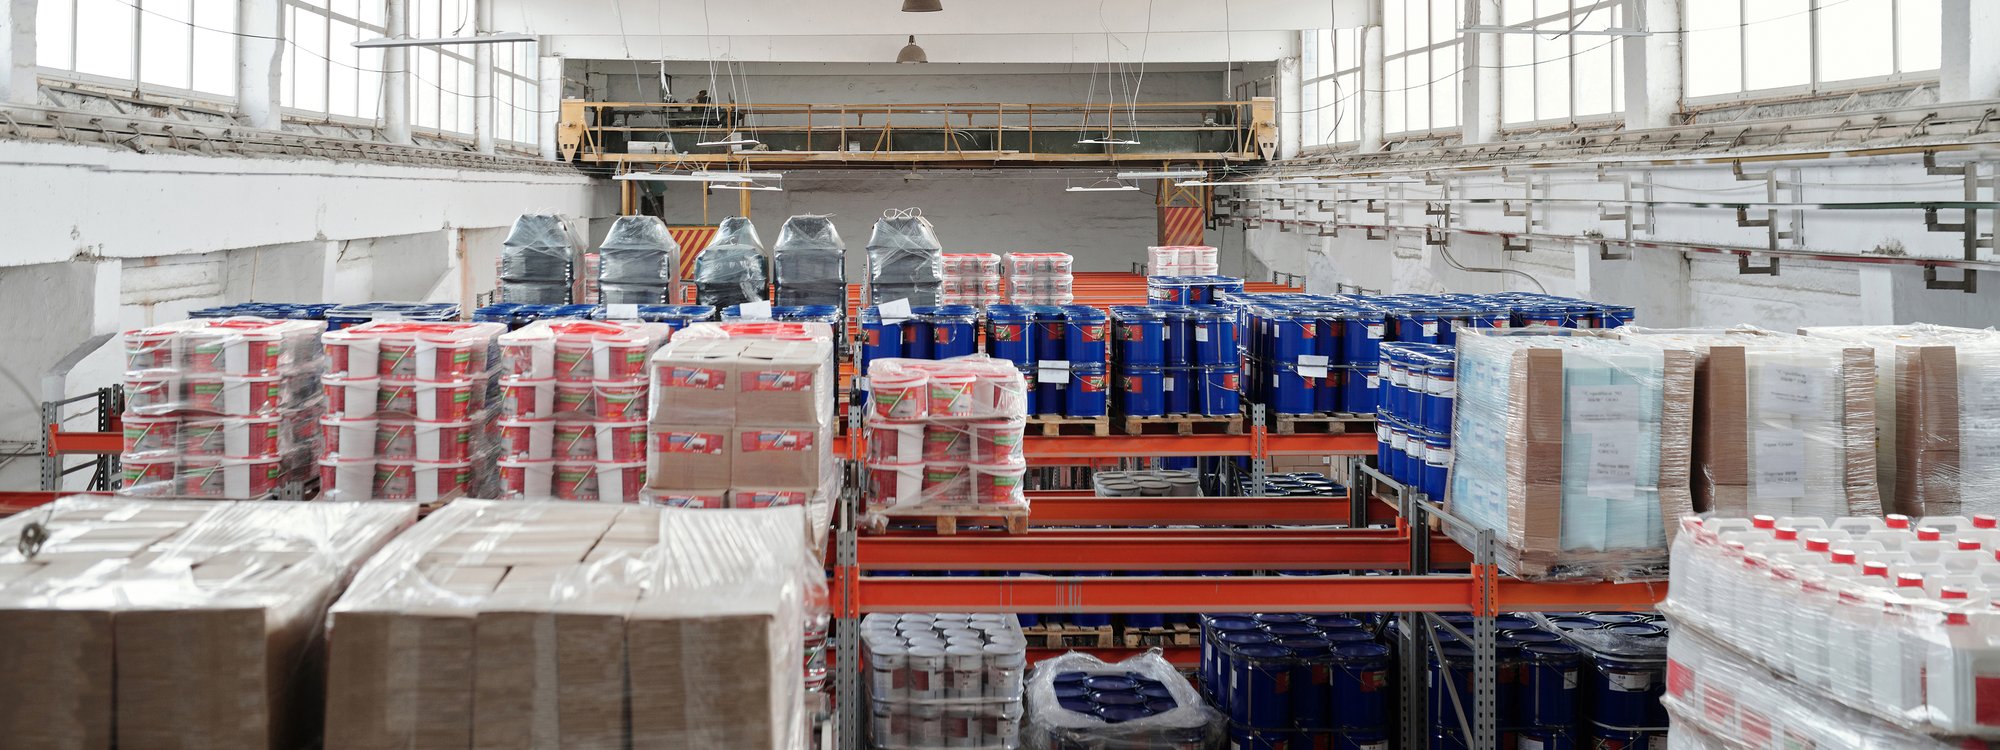 Interior warehouse photo displaying organized inventory on pallets and pallet racking